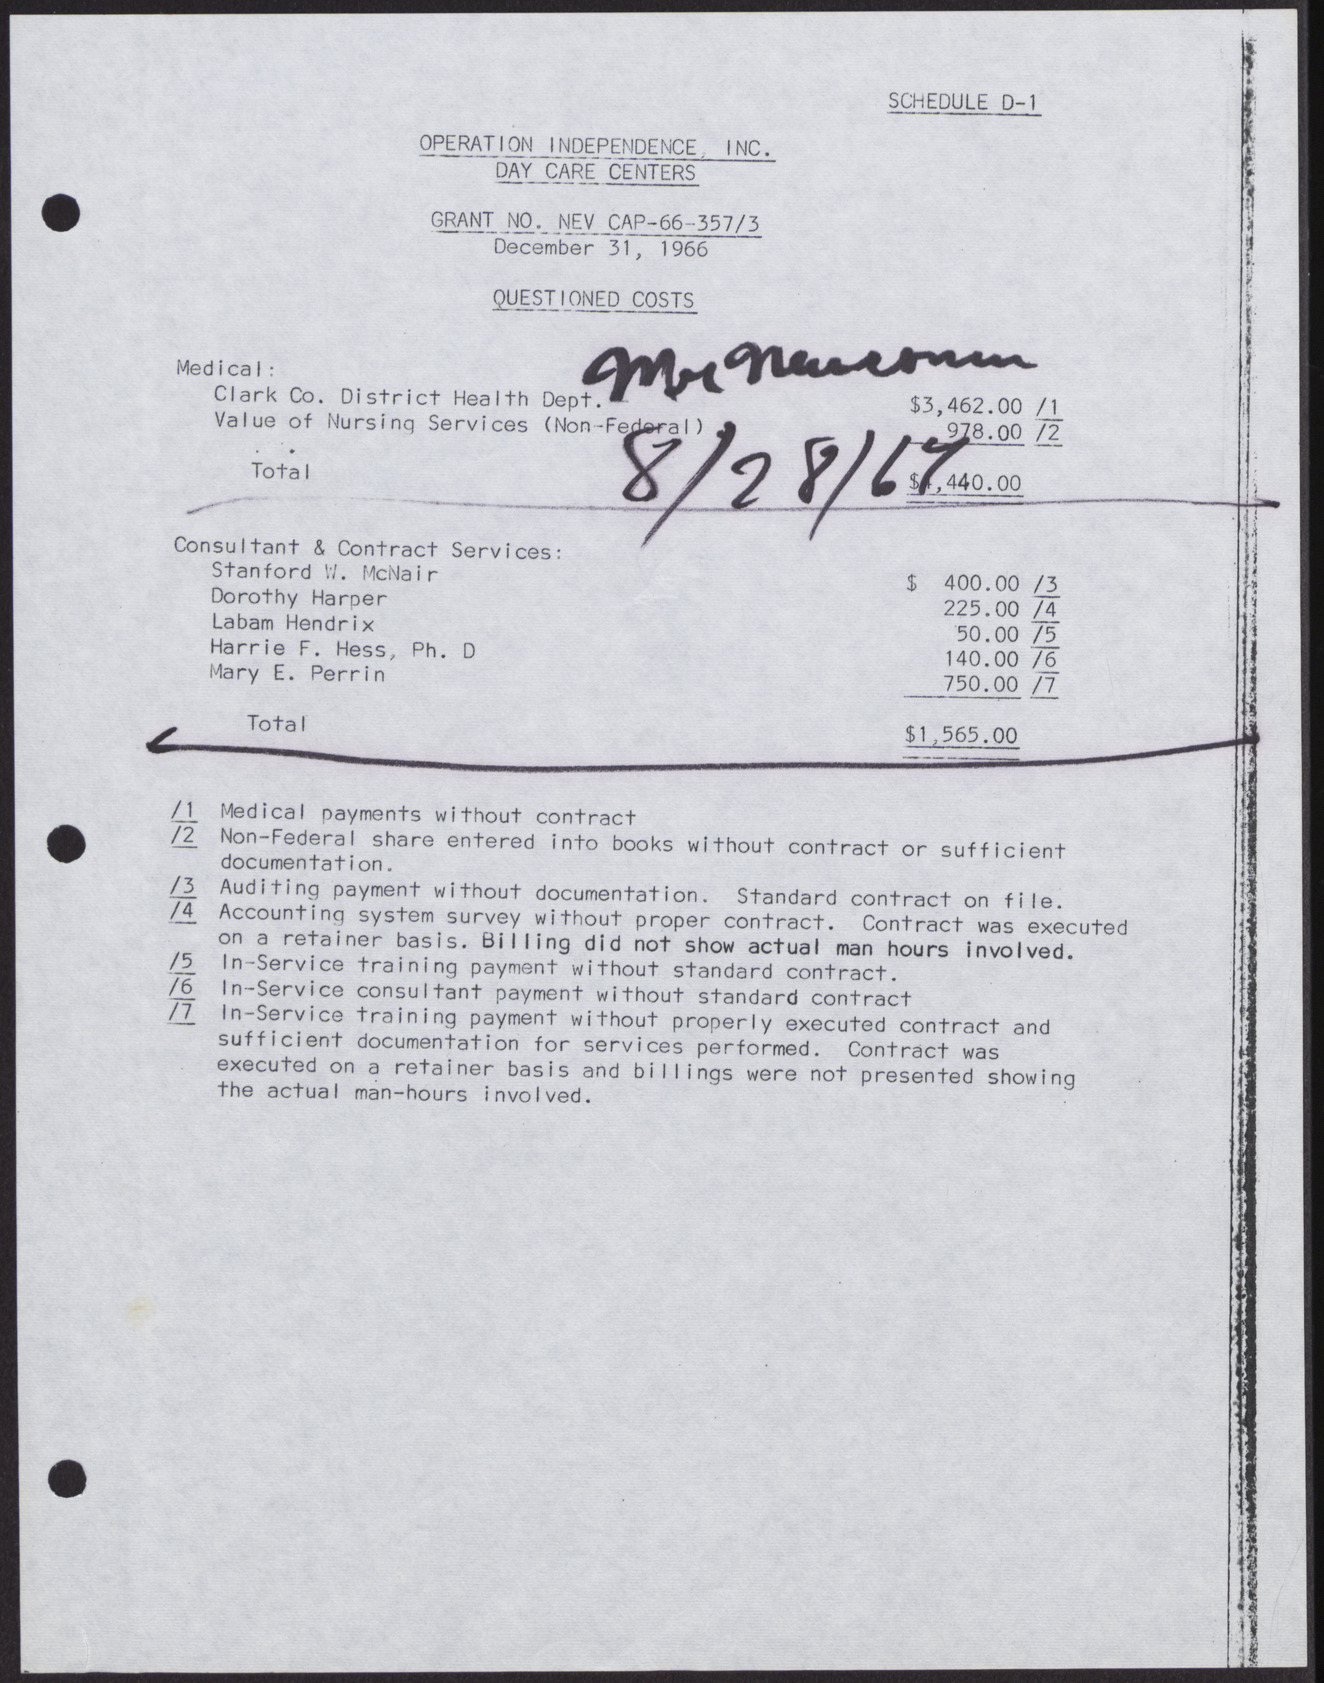 Operation Independence, Inc. Day Care Centers Questioned Costs, December 31, 1966